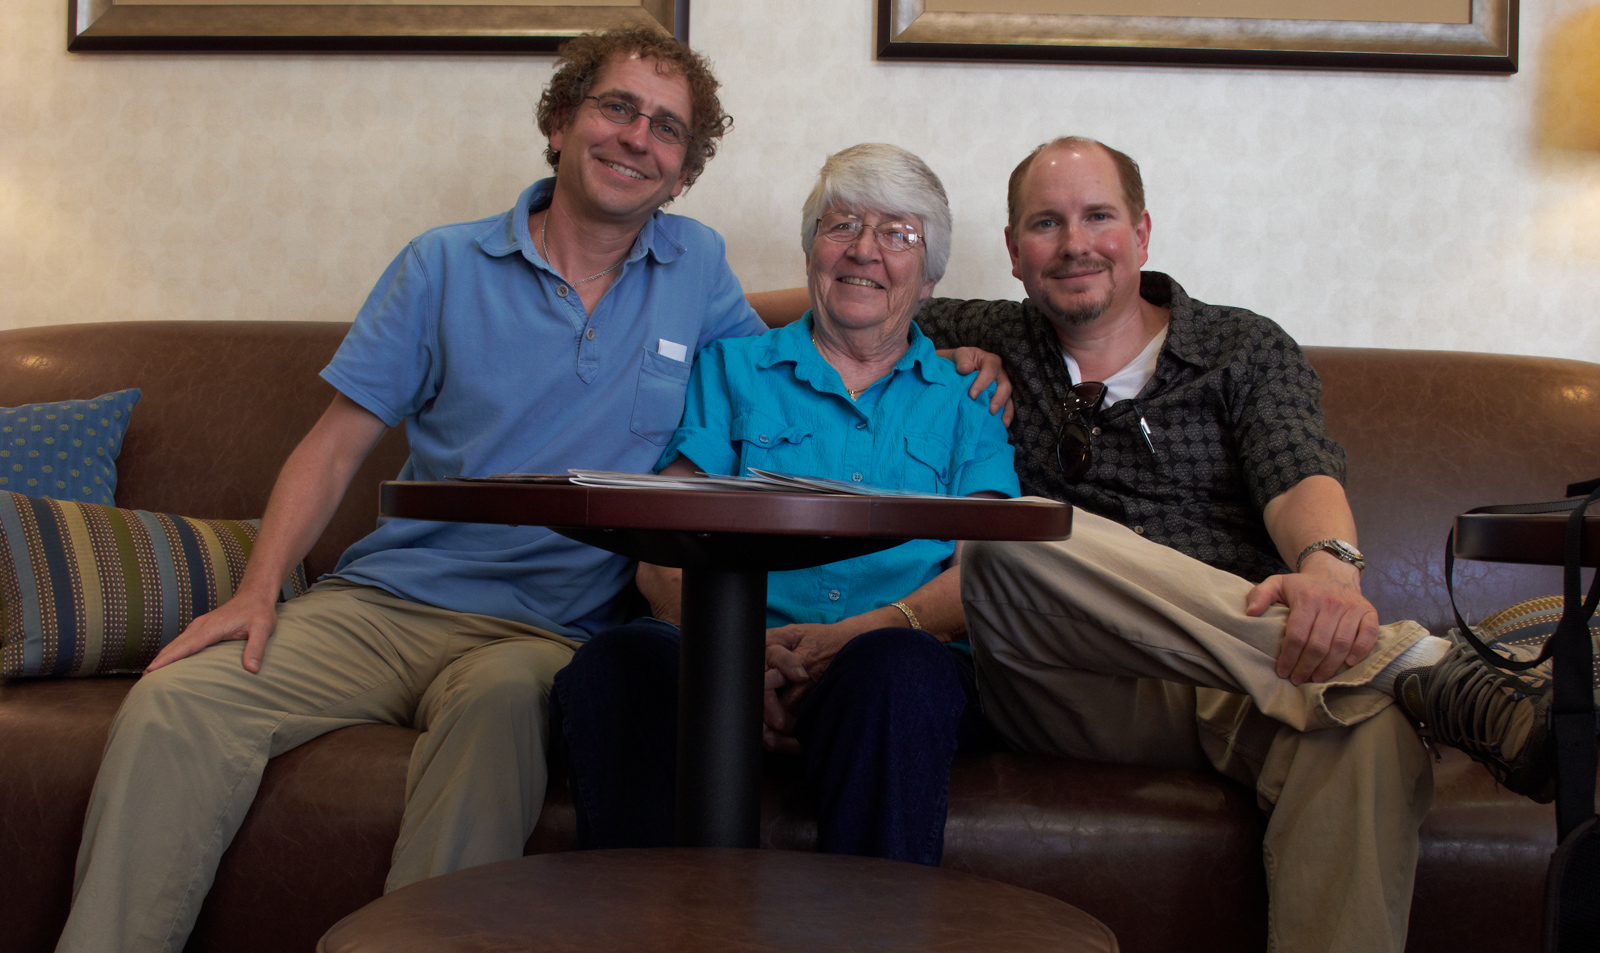 Me, Aunt Pat, and Marc sitting in the lobby of our hotel room